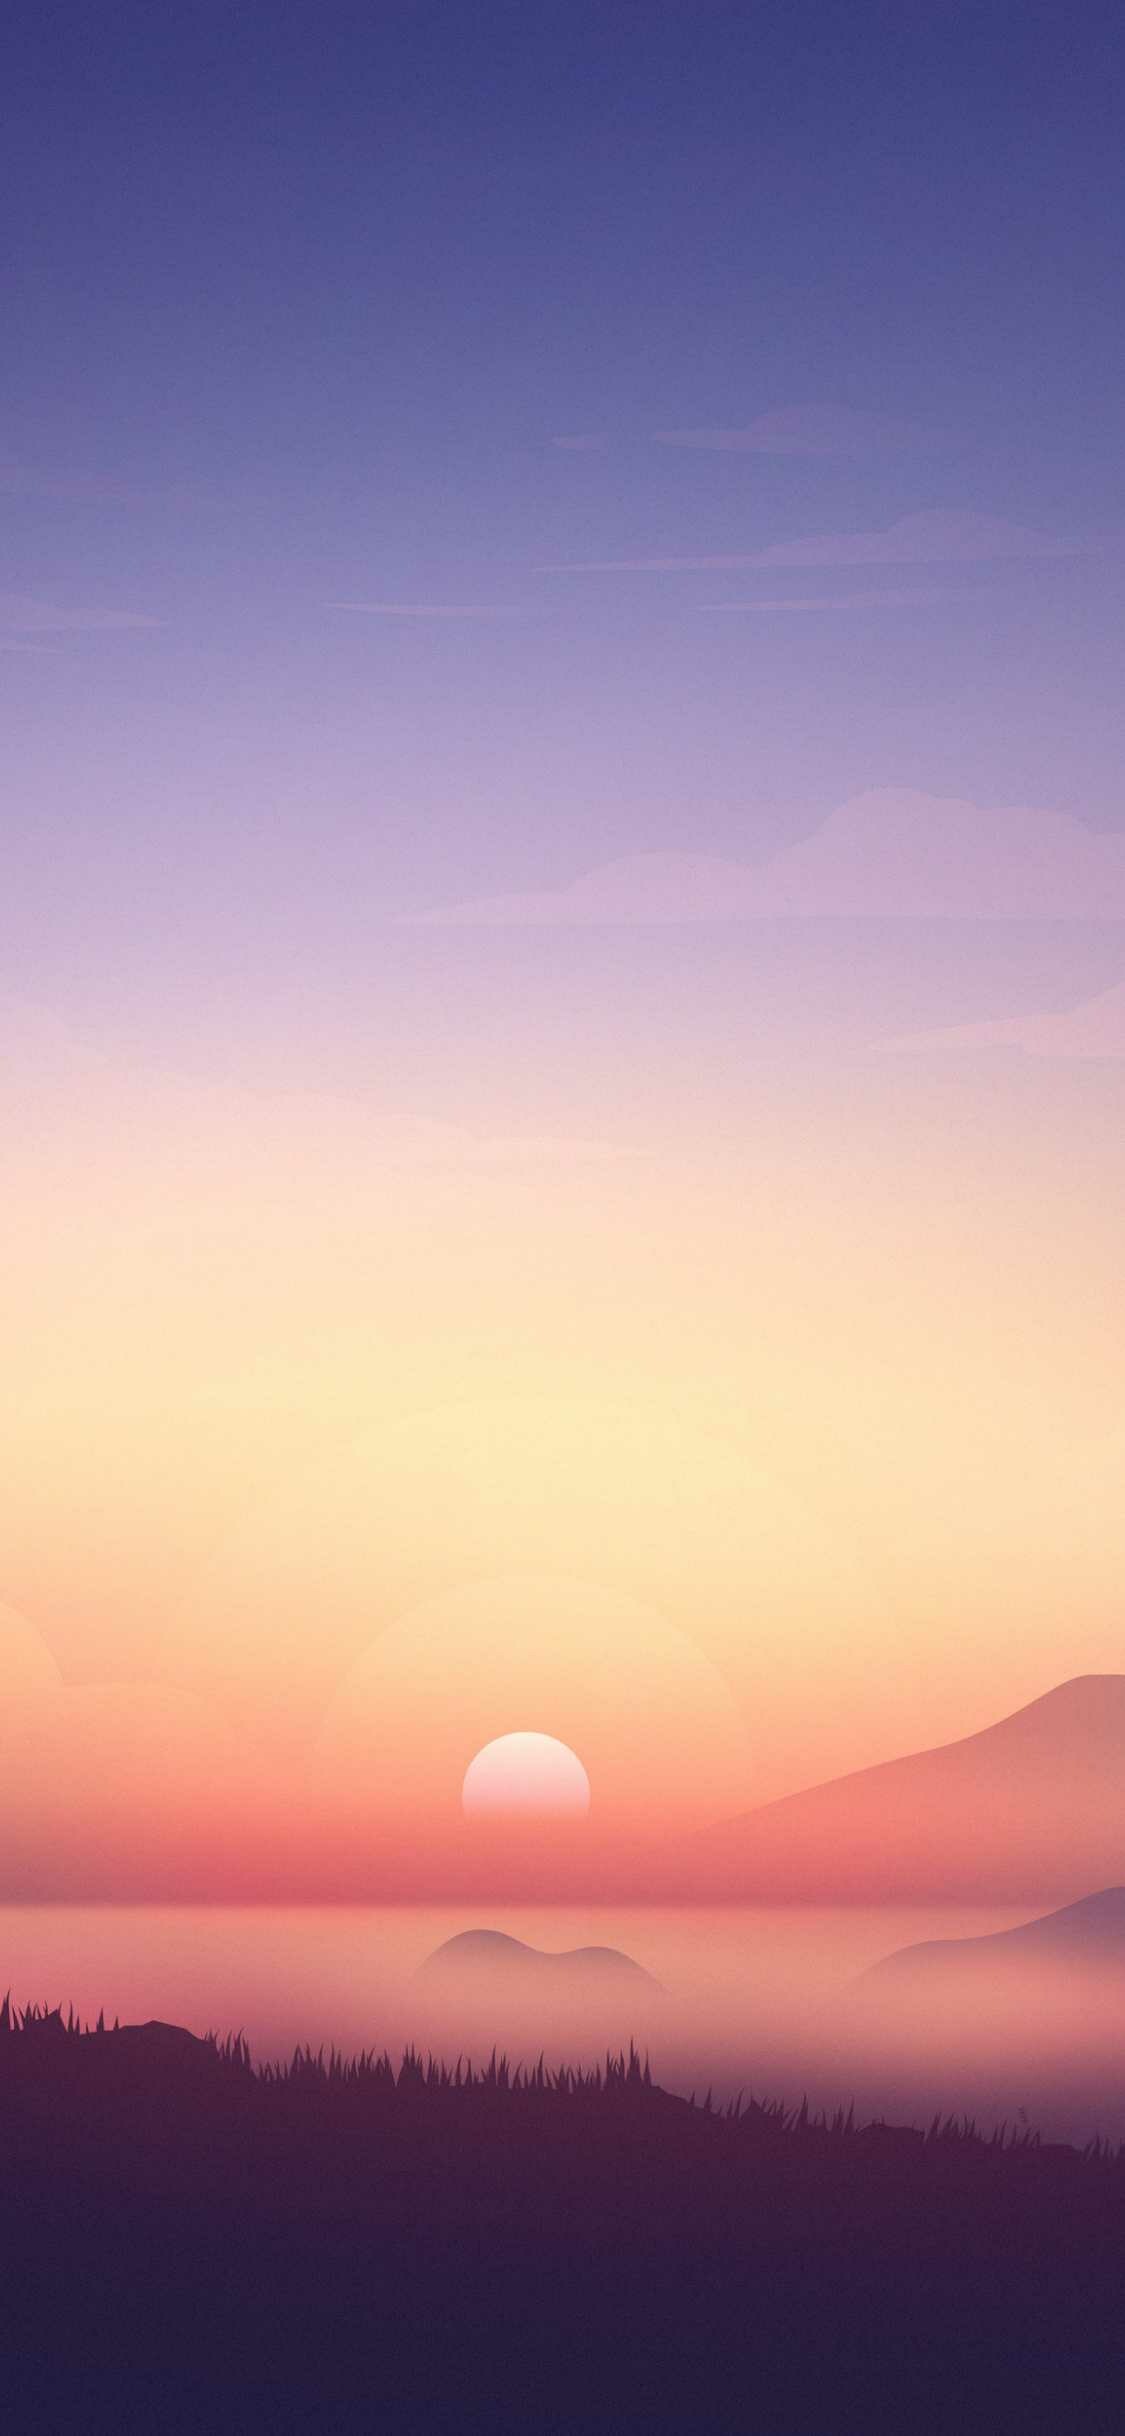 Sunrise: The sun is low on the horizon, Celestial object. 1130x2440 HD Background.